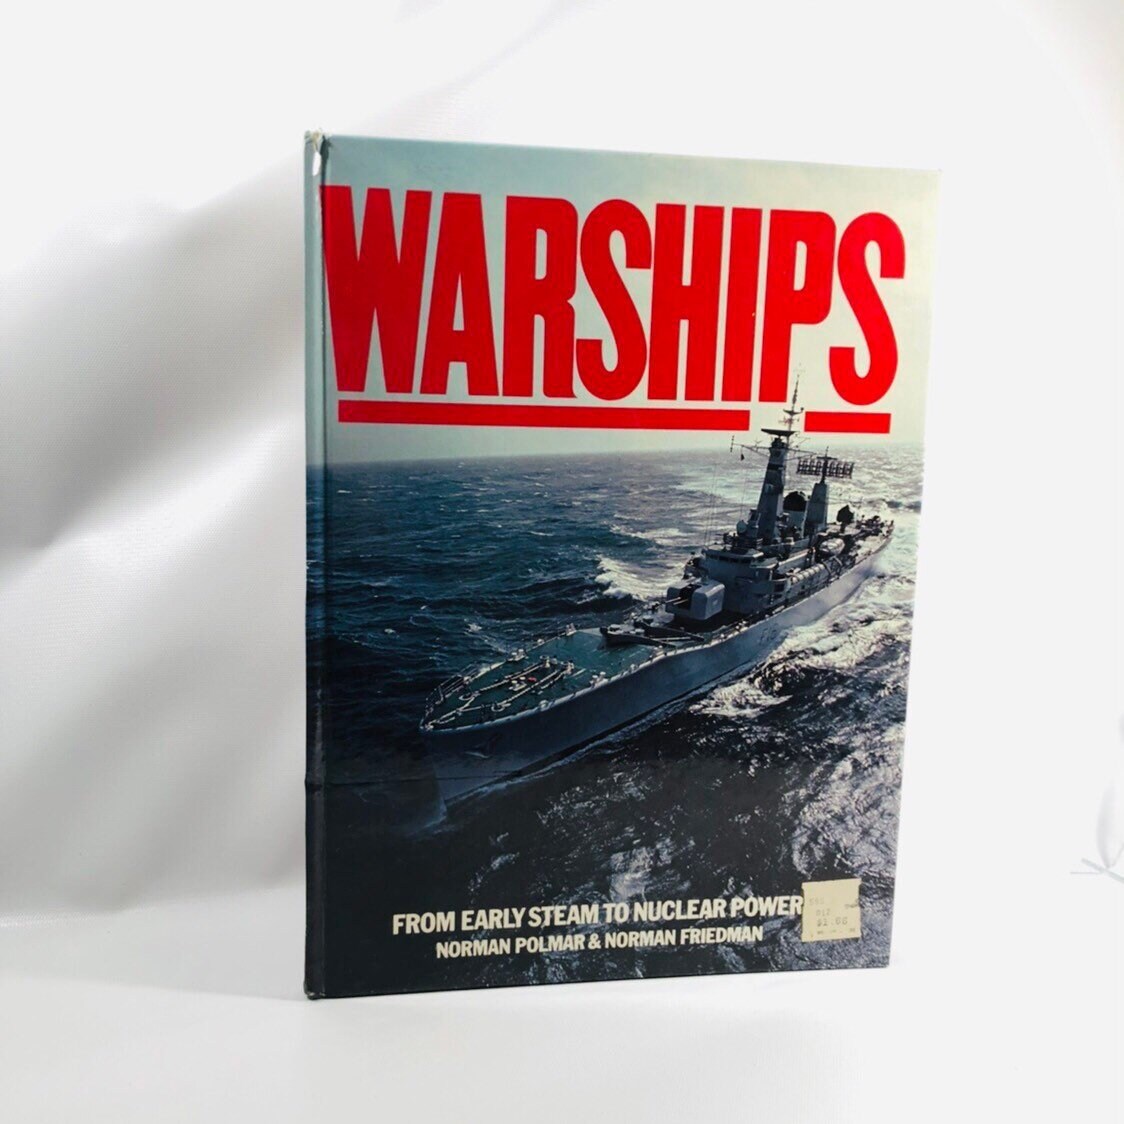 Warships, From Early Steam to Nuclear Power by Norman Polmar & Norman Friedman 1981 Vintage Book Vintage Book